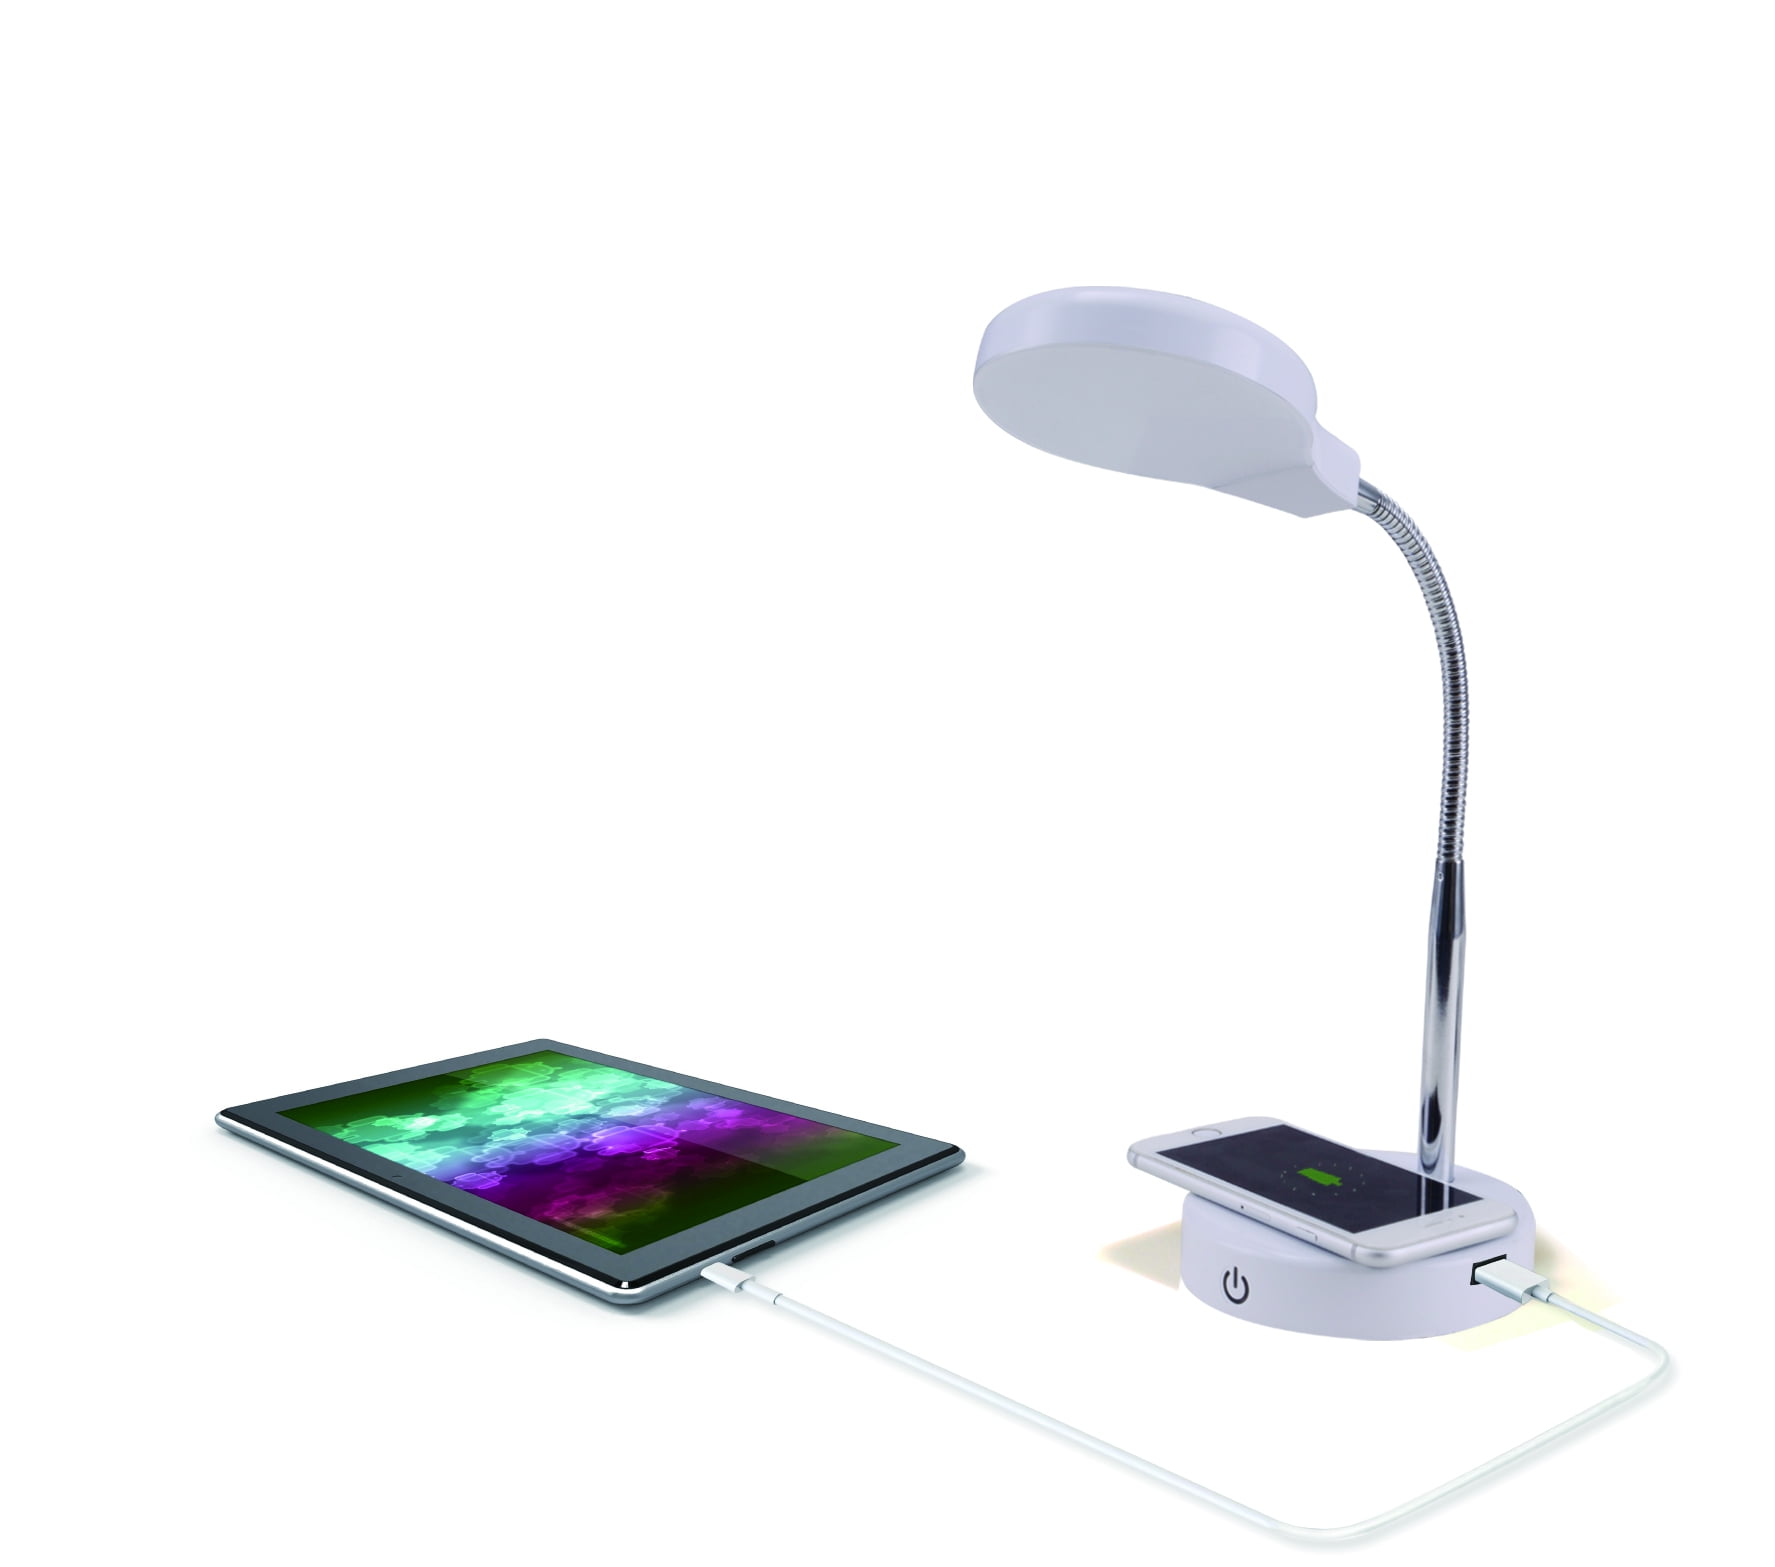 Mainstays Led Desk Lamp With Qi, Led Desk Lamp With Wireless Charger Usb Charging Port